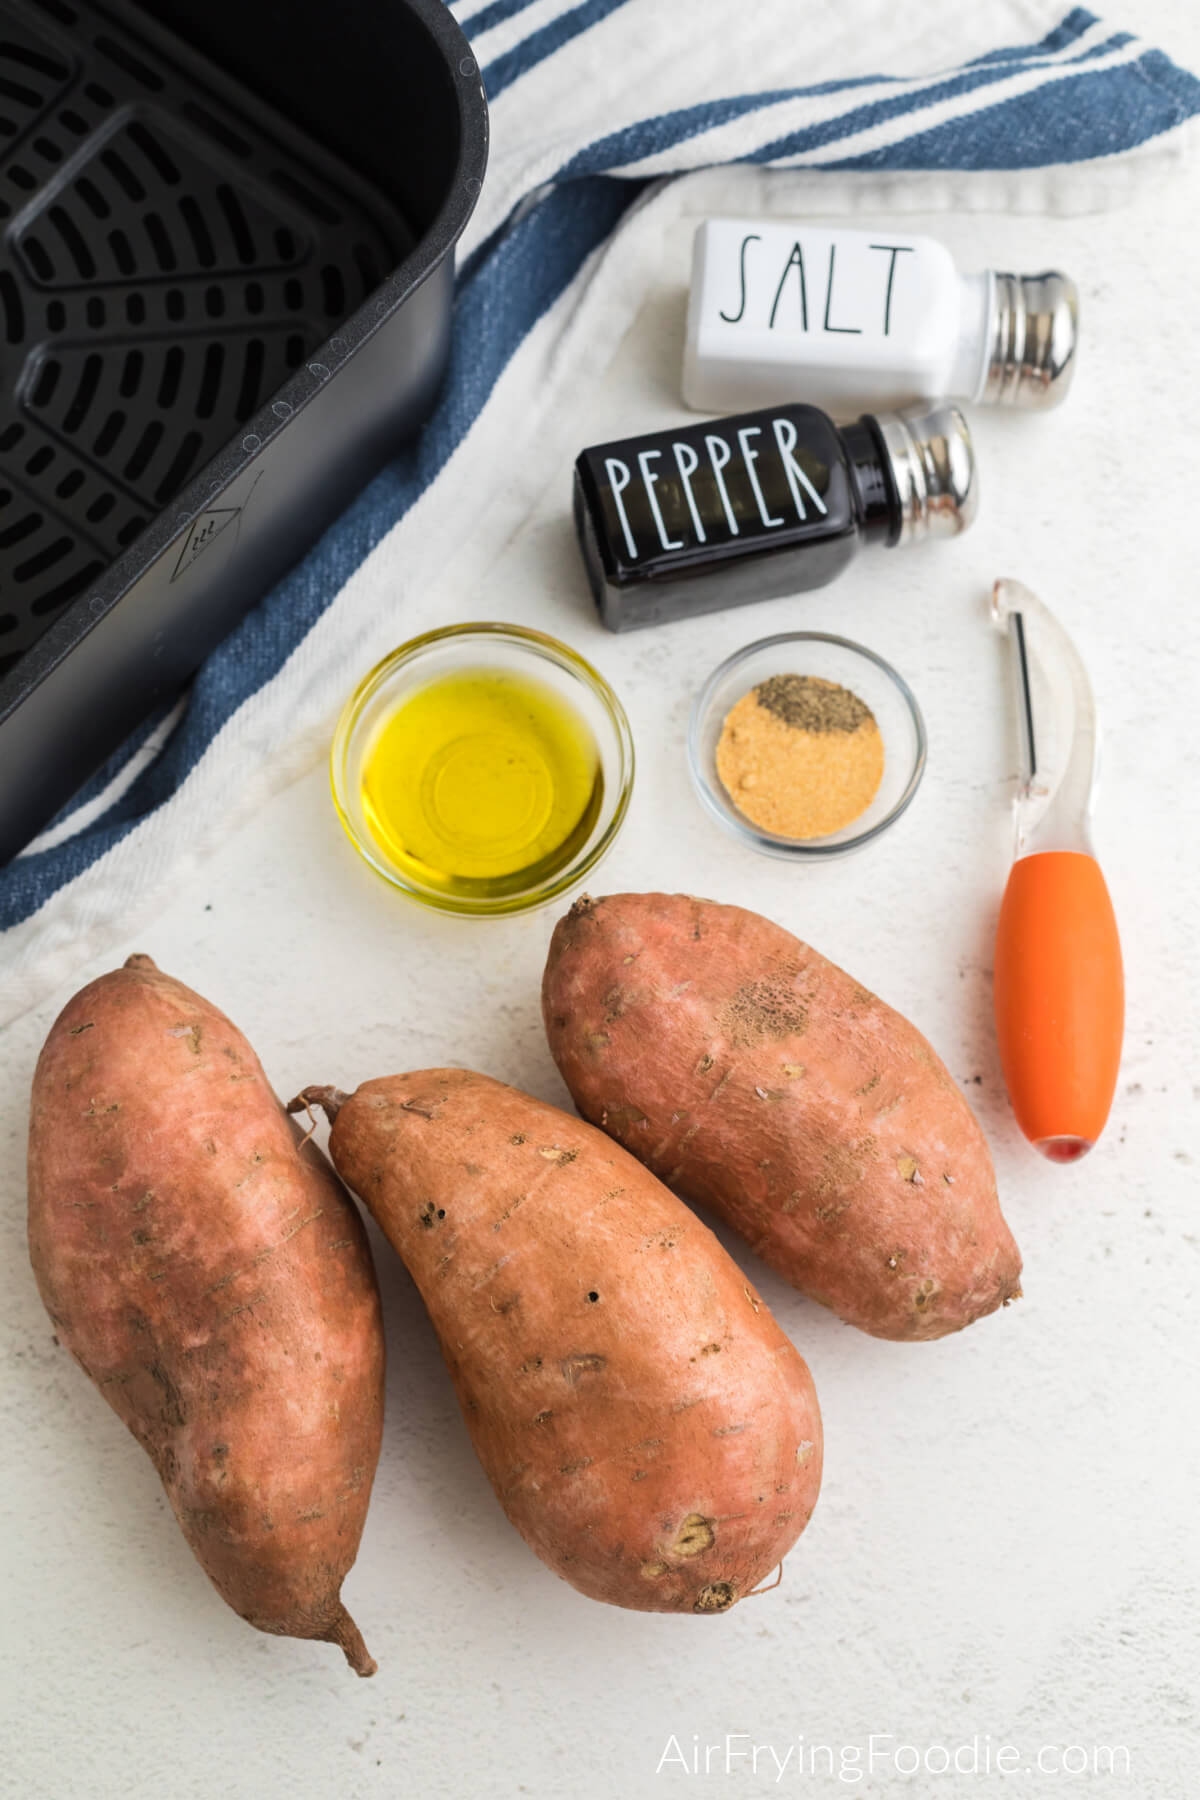 sweet potatoes, olive oil, garlic powder, pepper, an air fryer basket, and vegetable peeler on a white table.